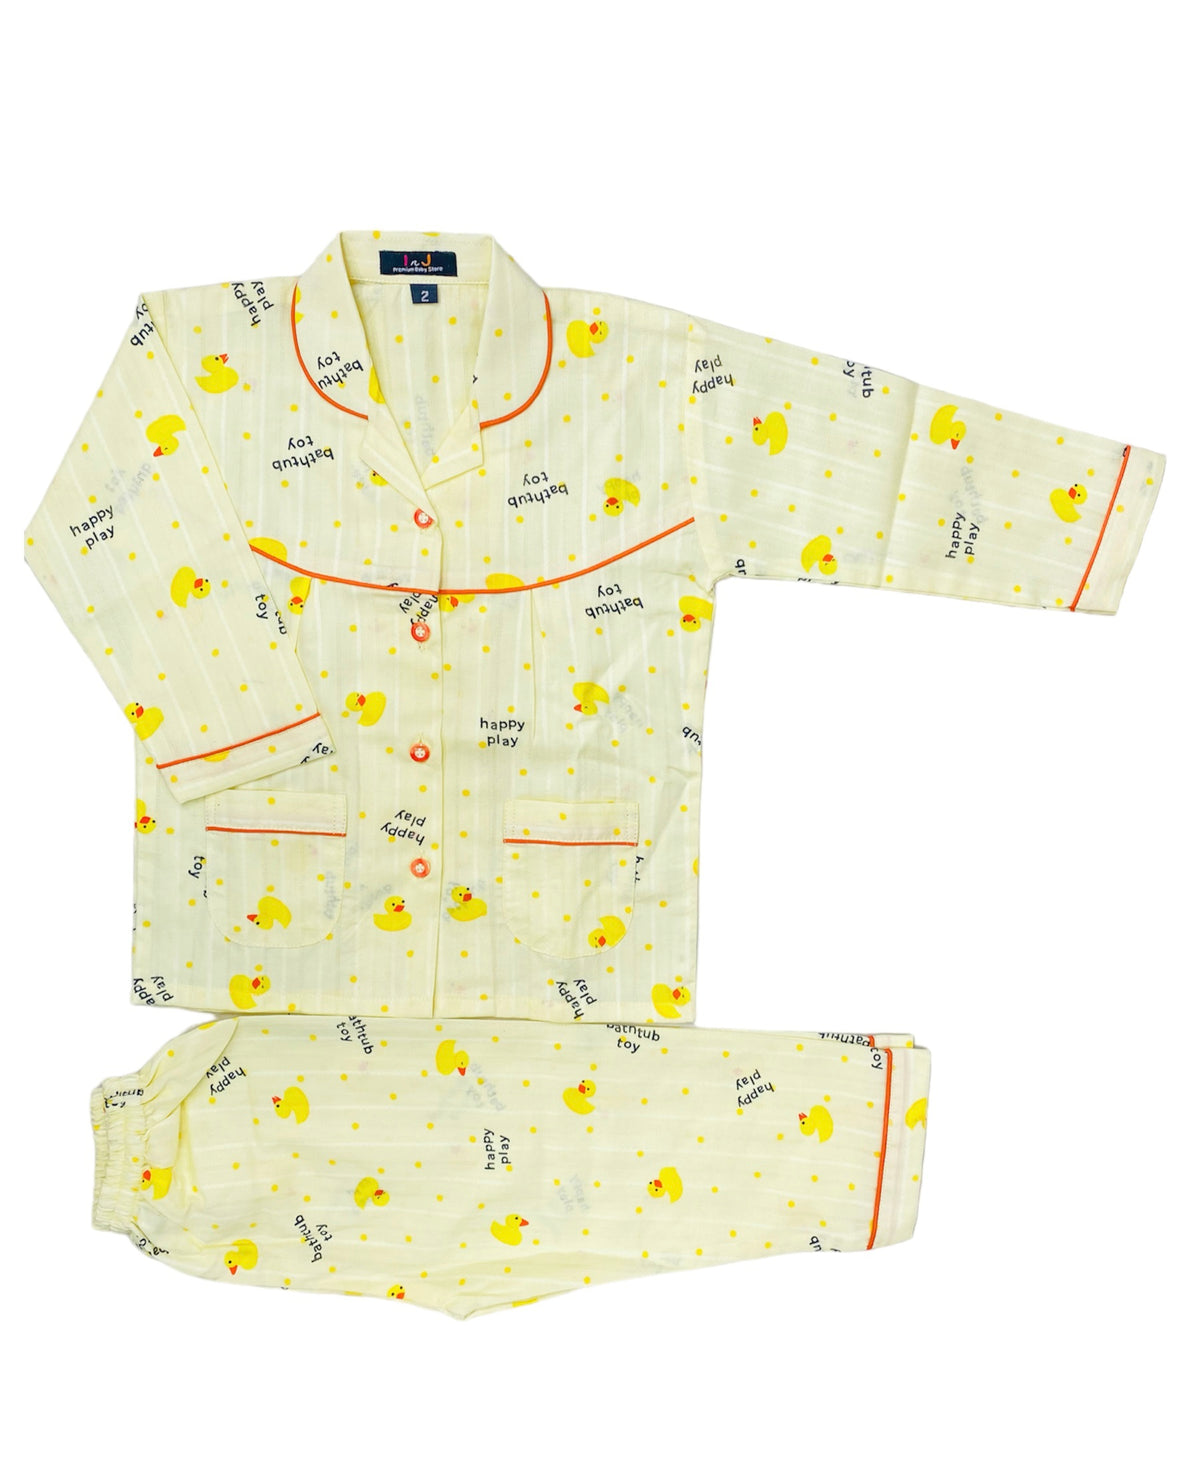 Yellow Duck Cotton Night Suits